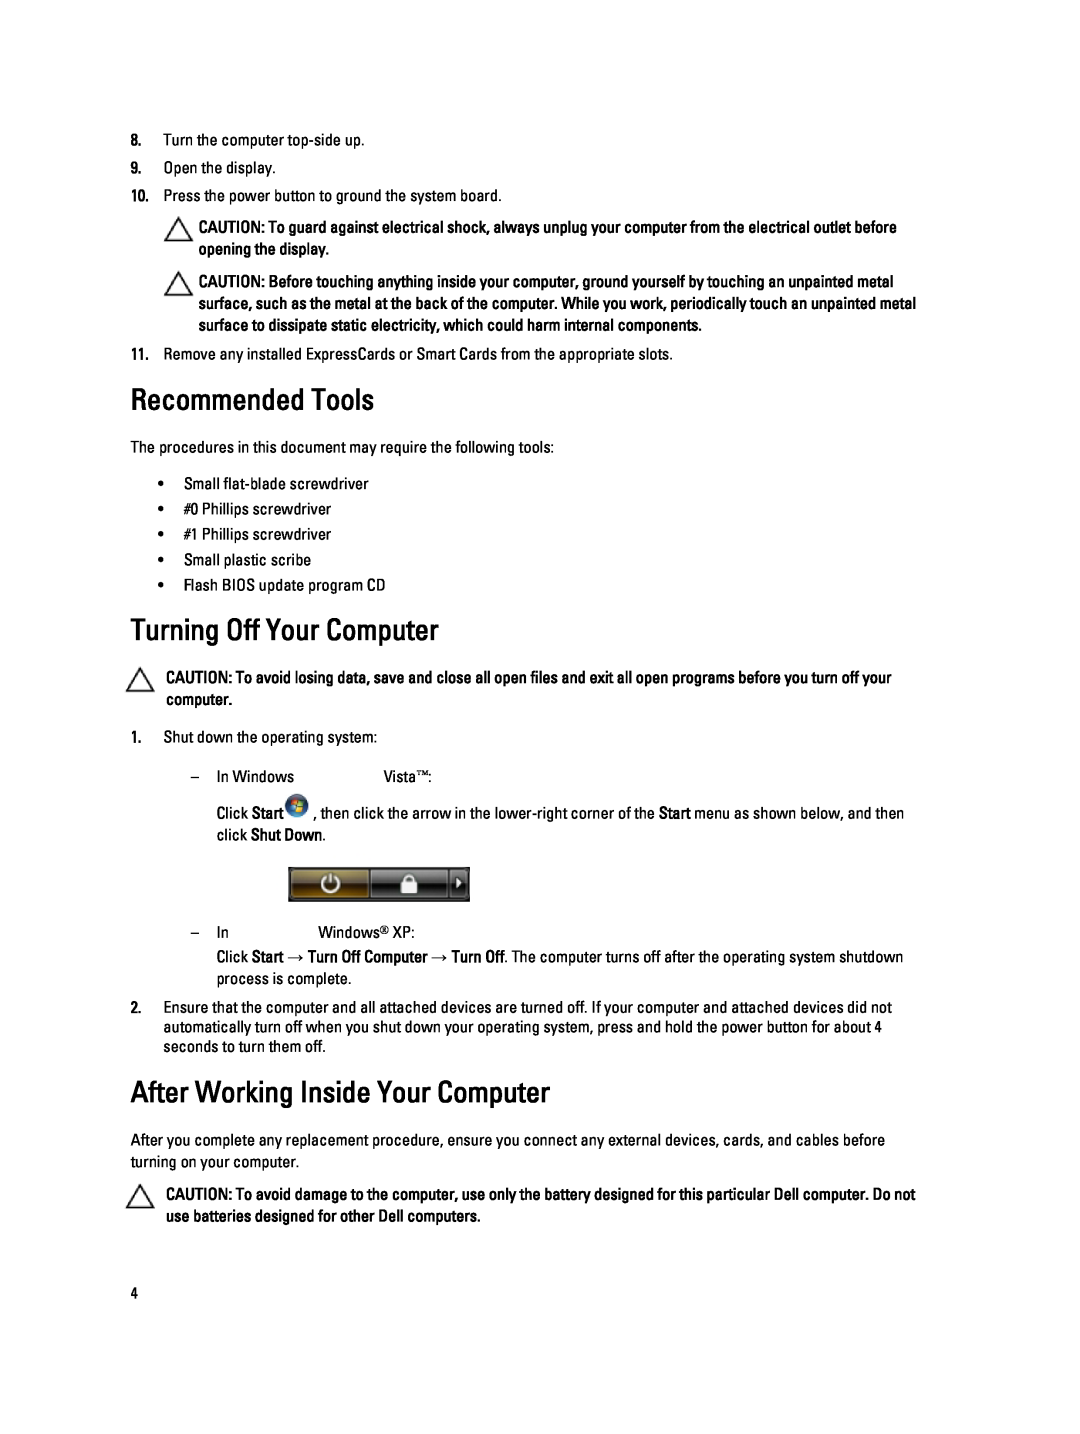 Dell V130 service manual Recommended Tools, Turning Off Your Computer, After Working Inside Your Computer 